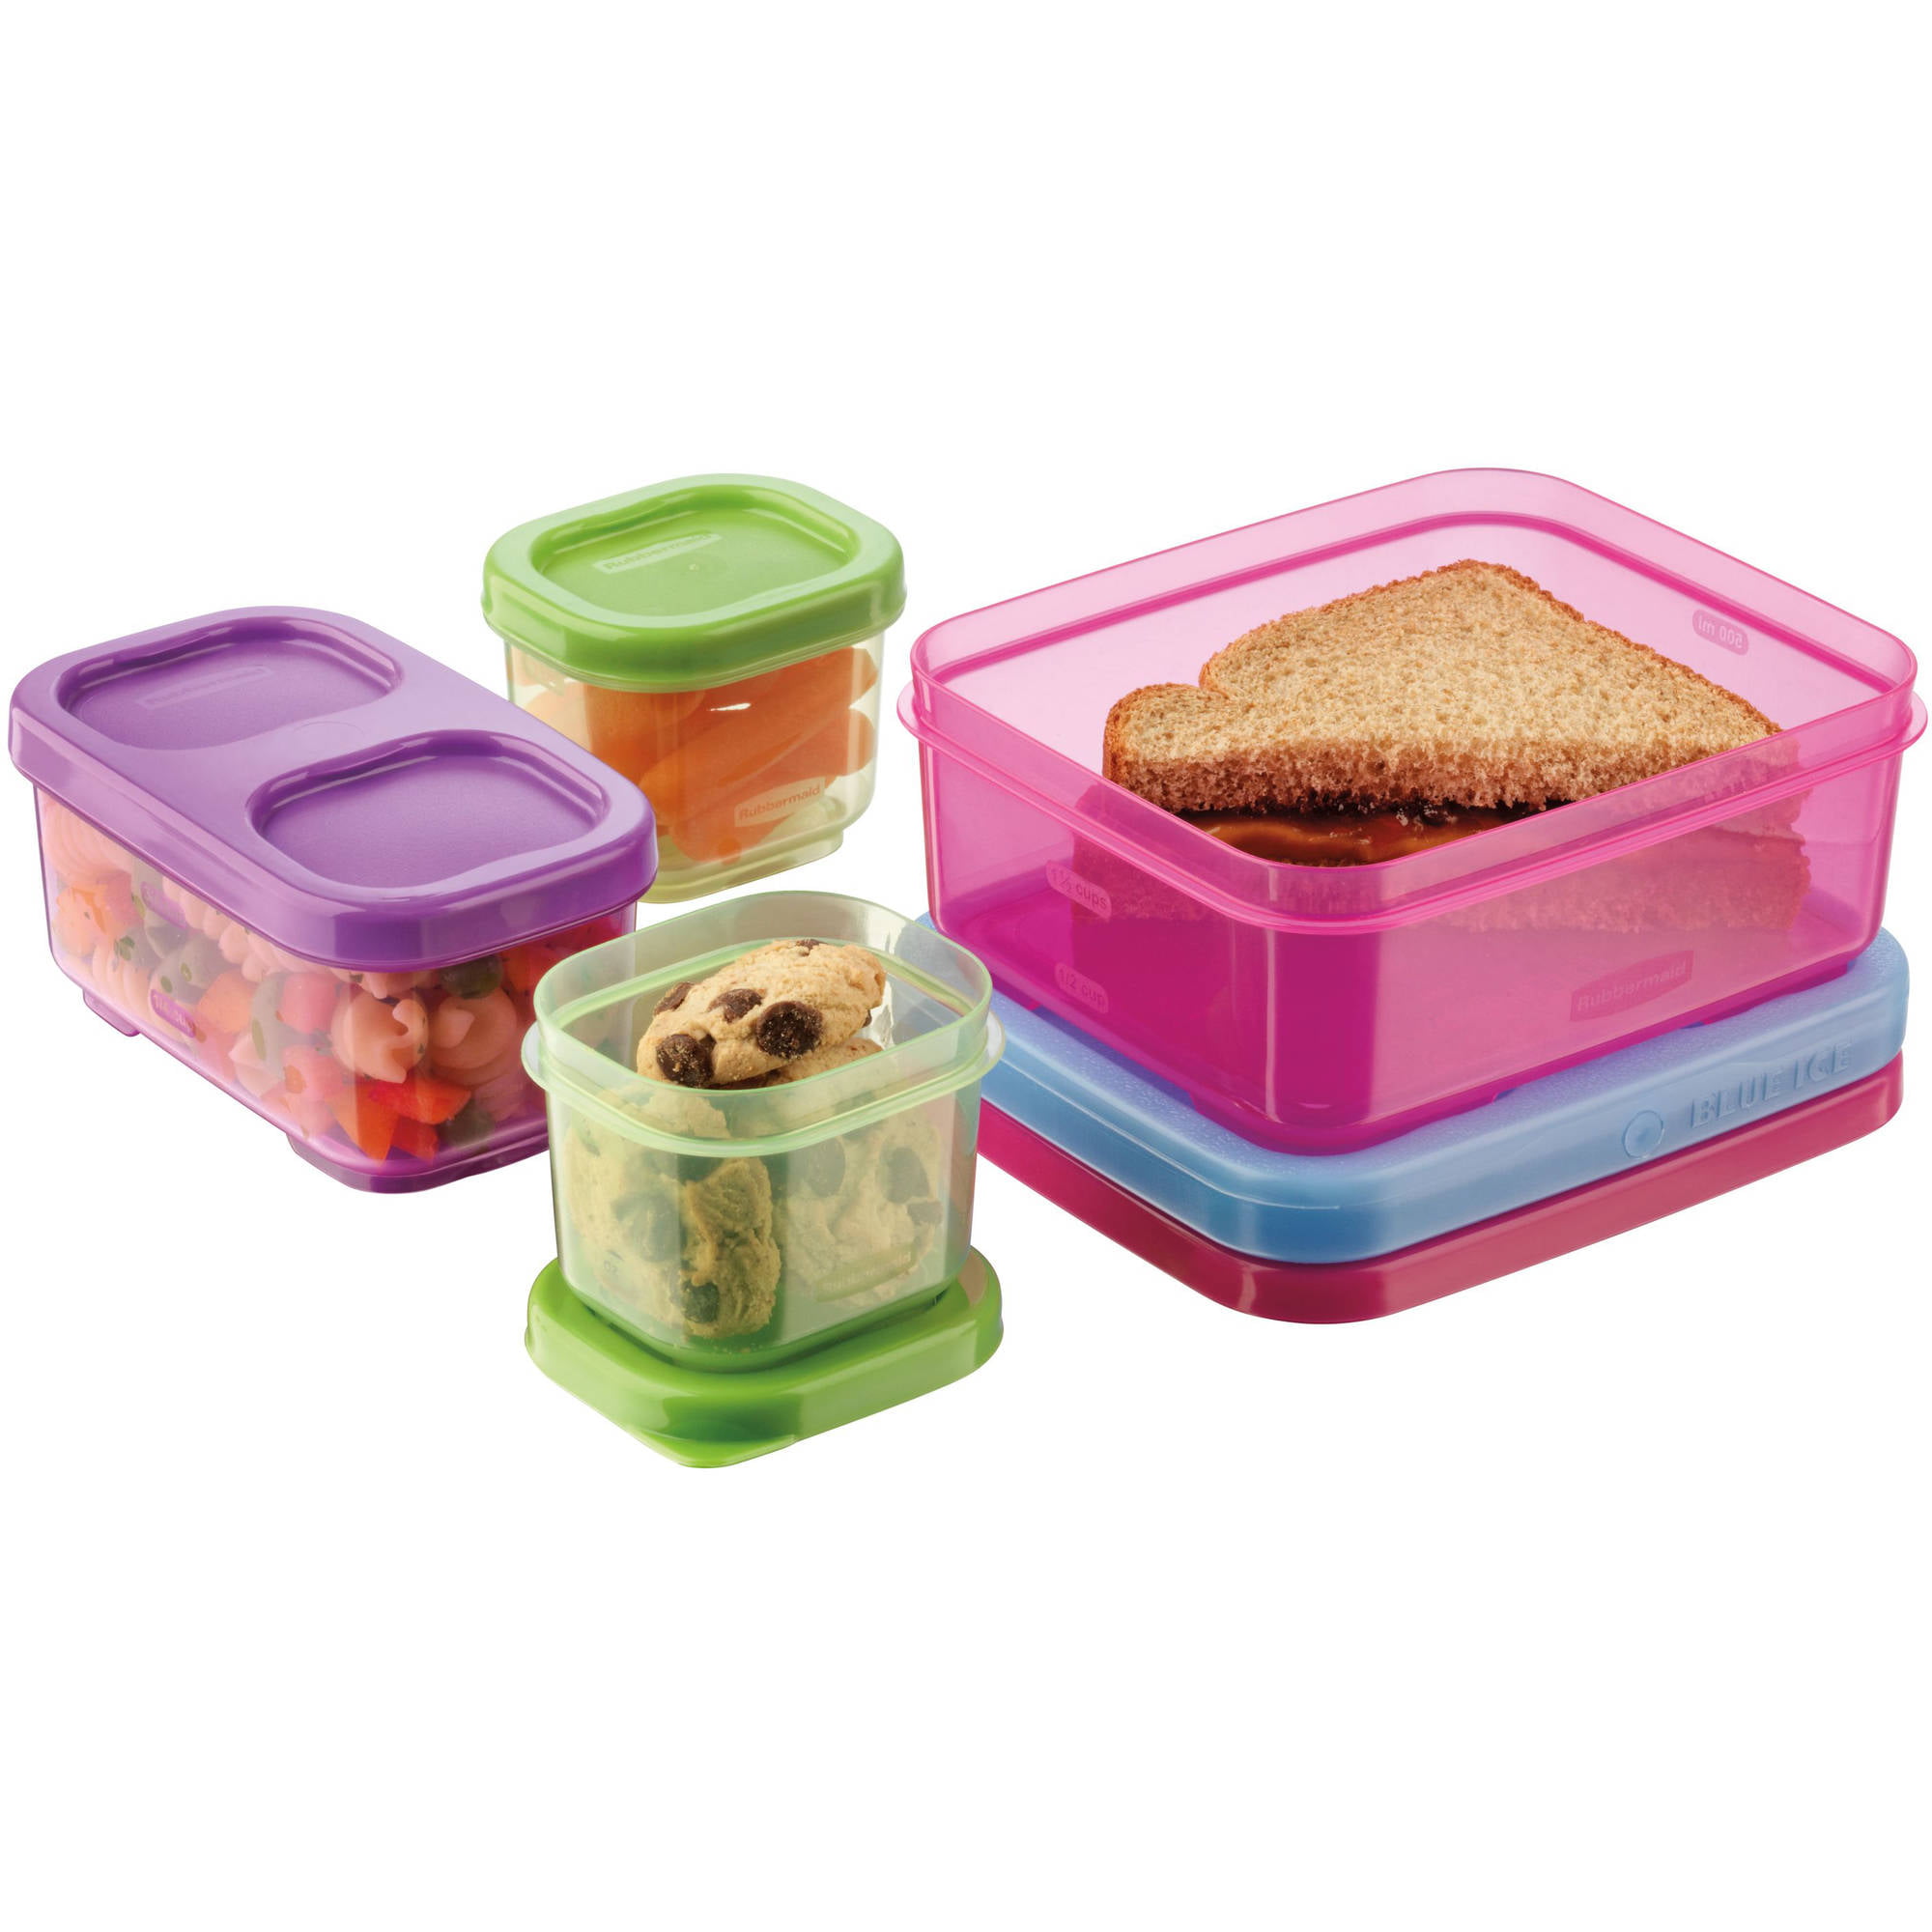 Rubbermaid LunchBlox Kids Multi Color Lunch Kit with ice pack, 1